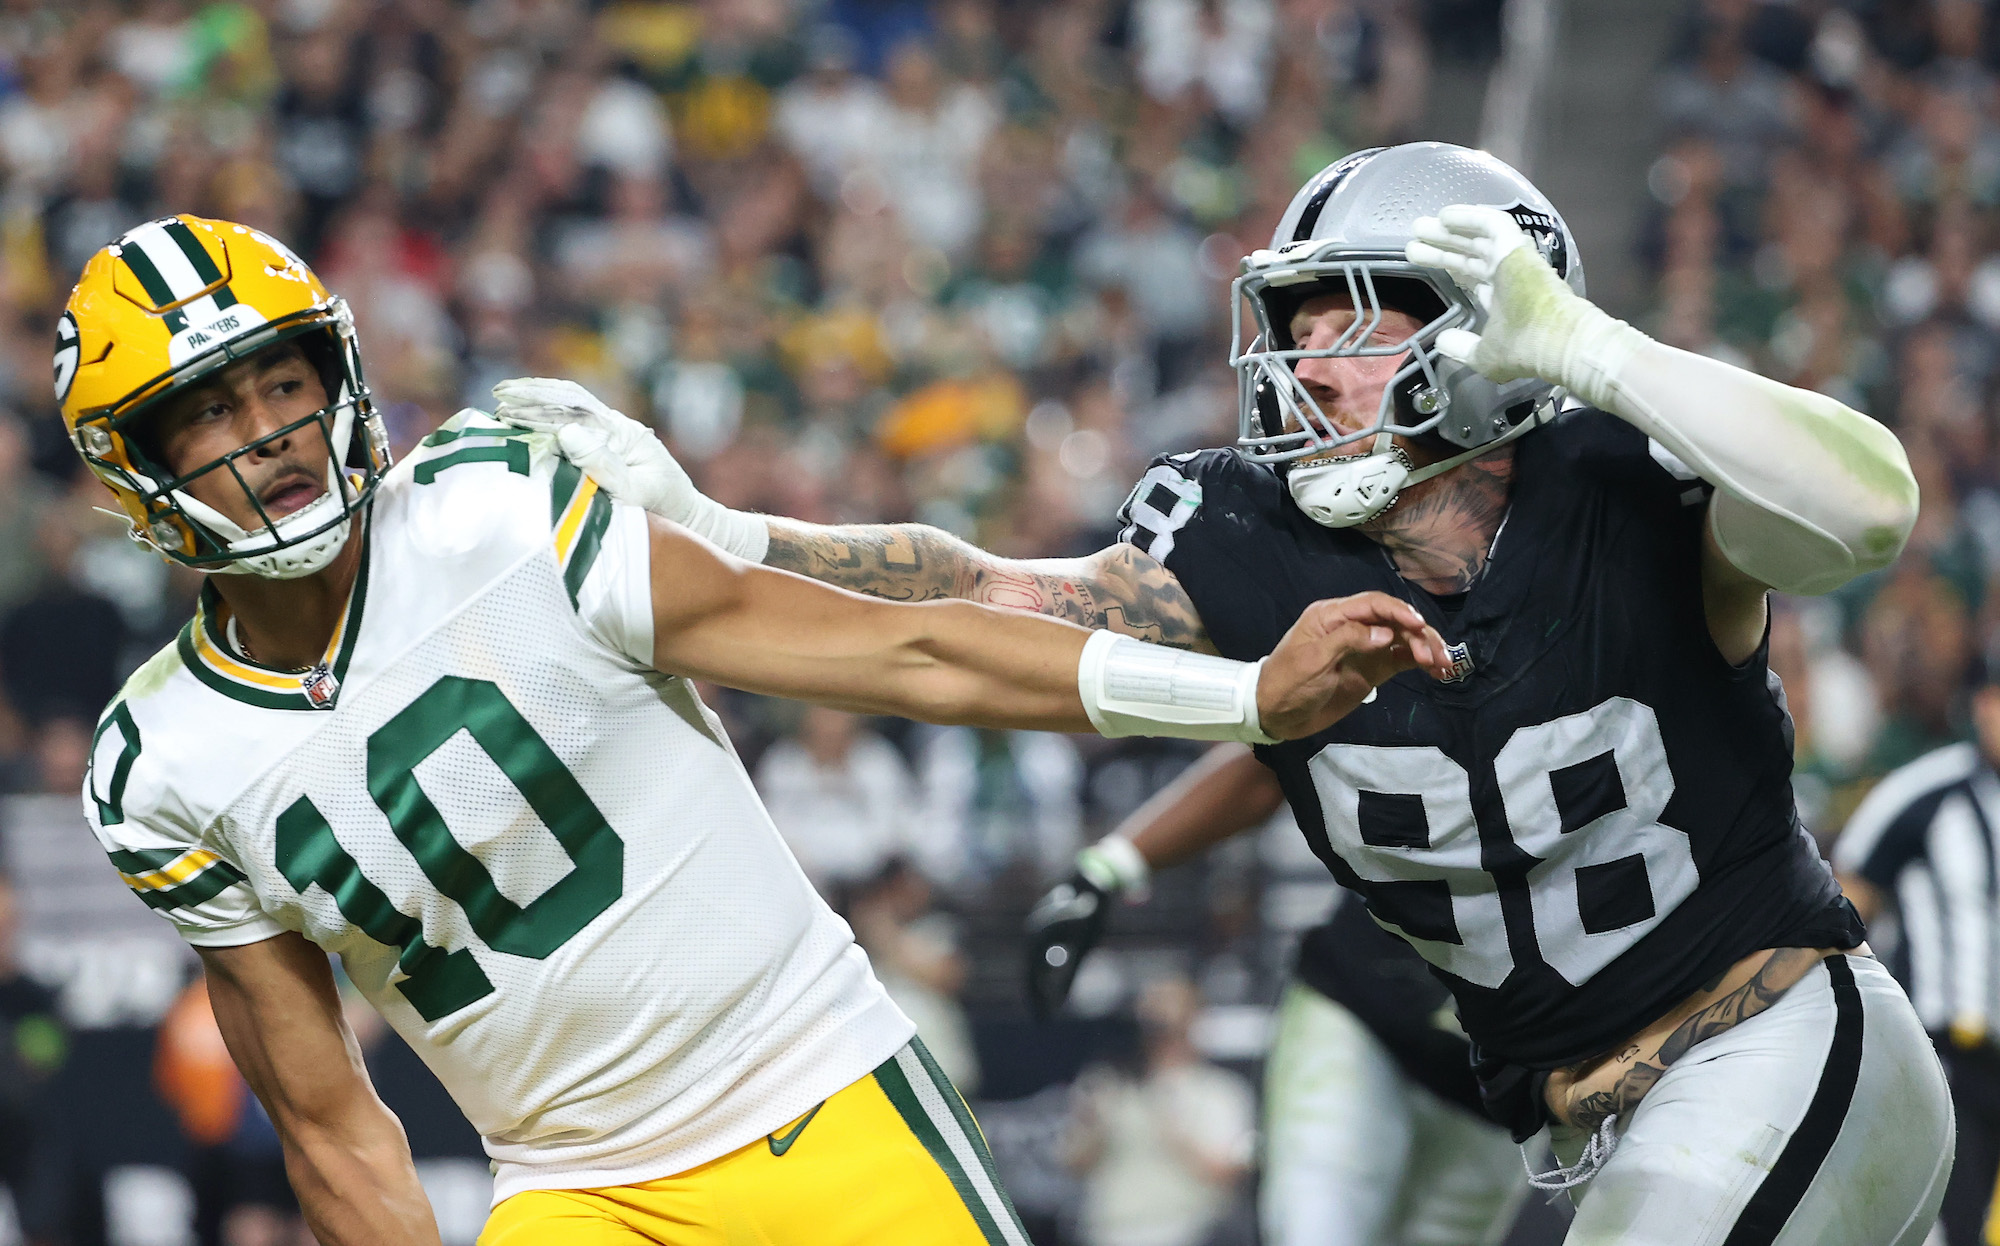 Jordan Love is pushed by a Raiders defender after throwing a pass.